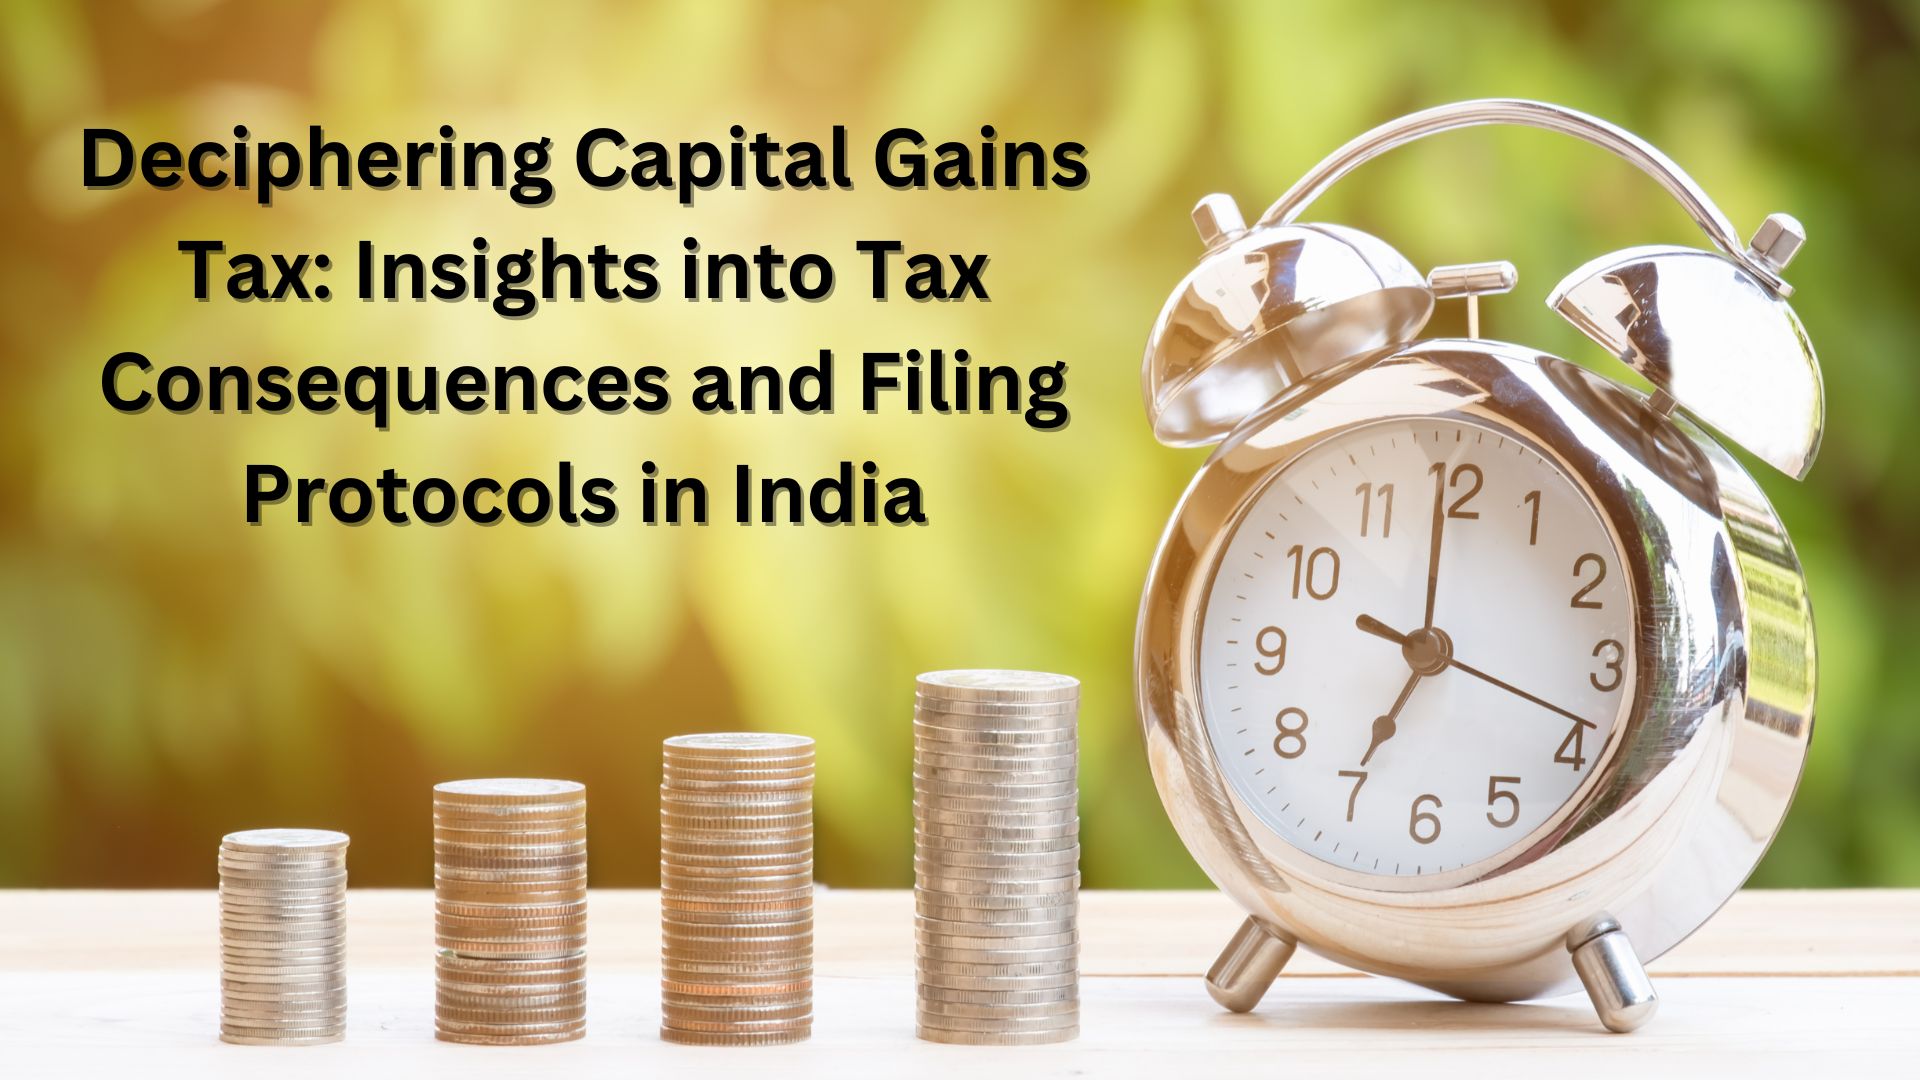 Deciphering Capital Gains Tax: Insights into Tax Consequences and Filing Protocols in India